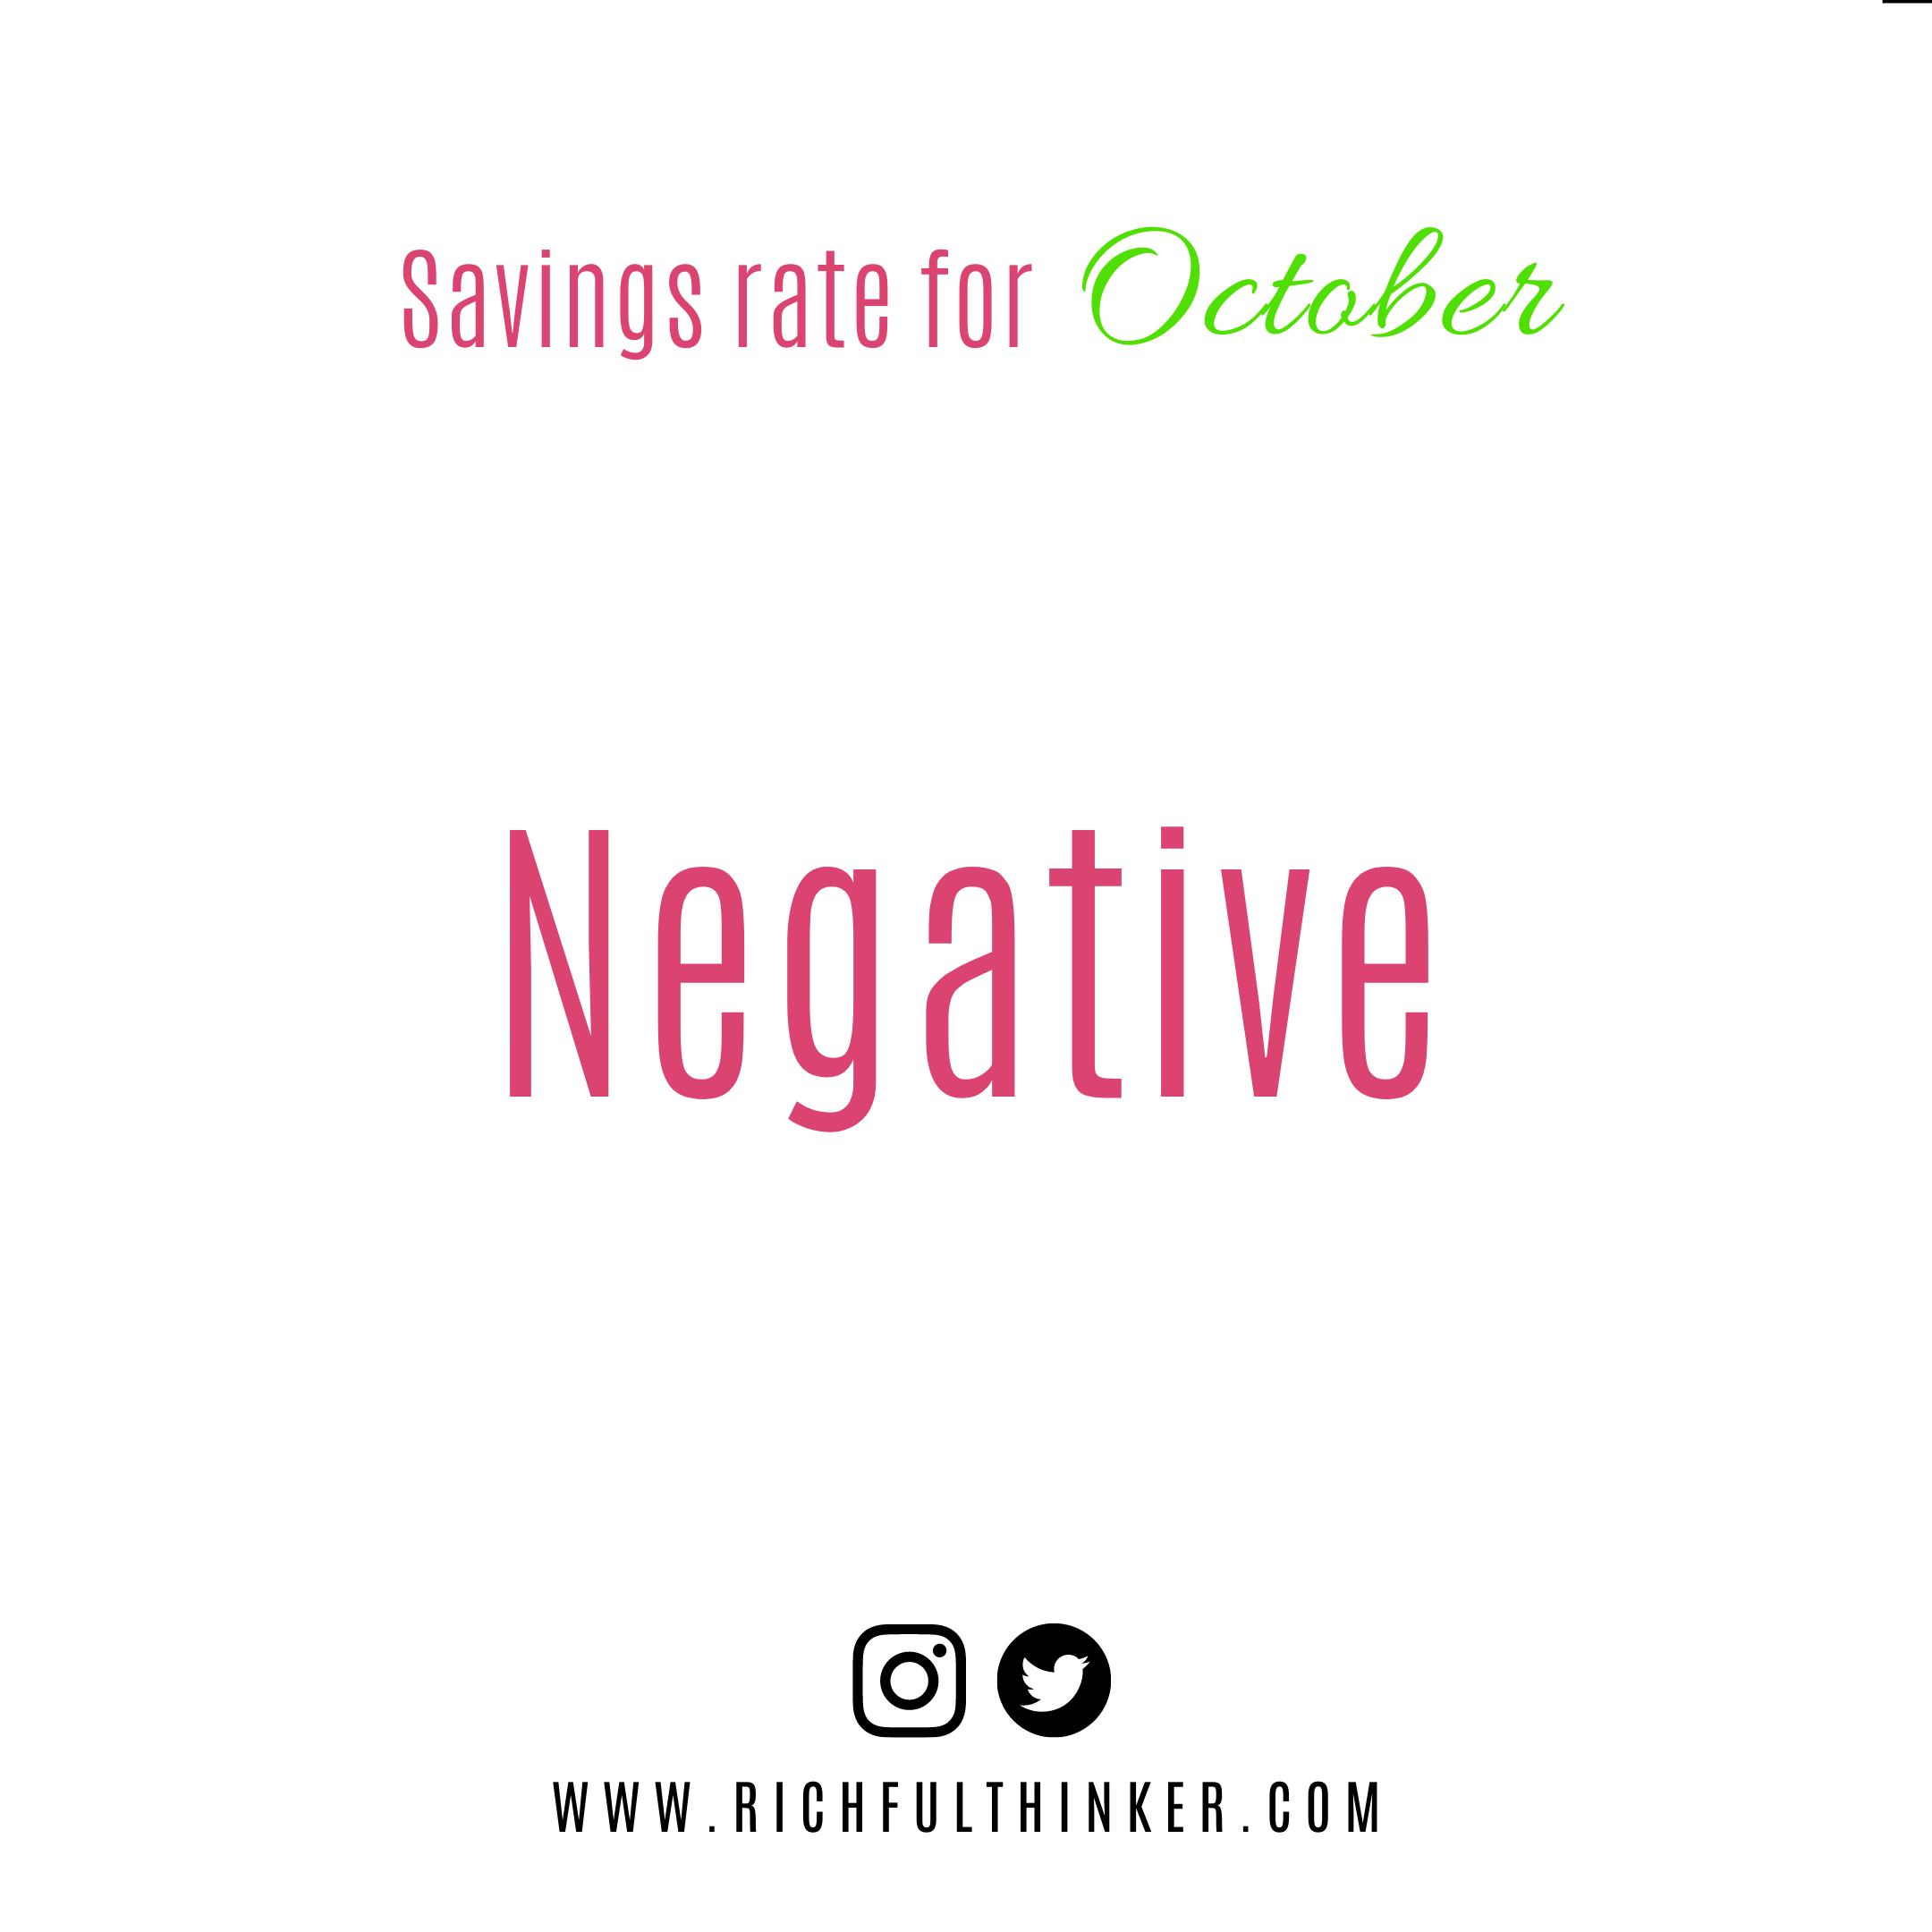 My Savings Rate. Negative, I saved nothing in October!